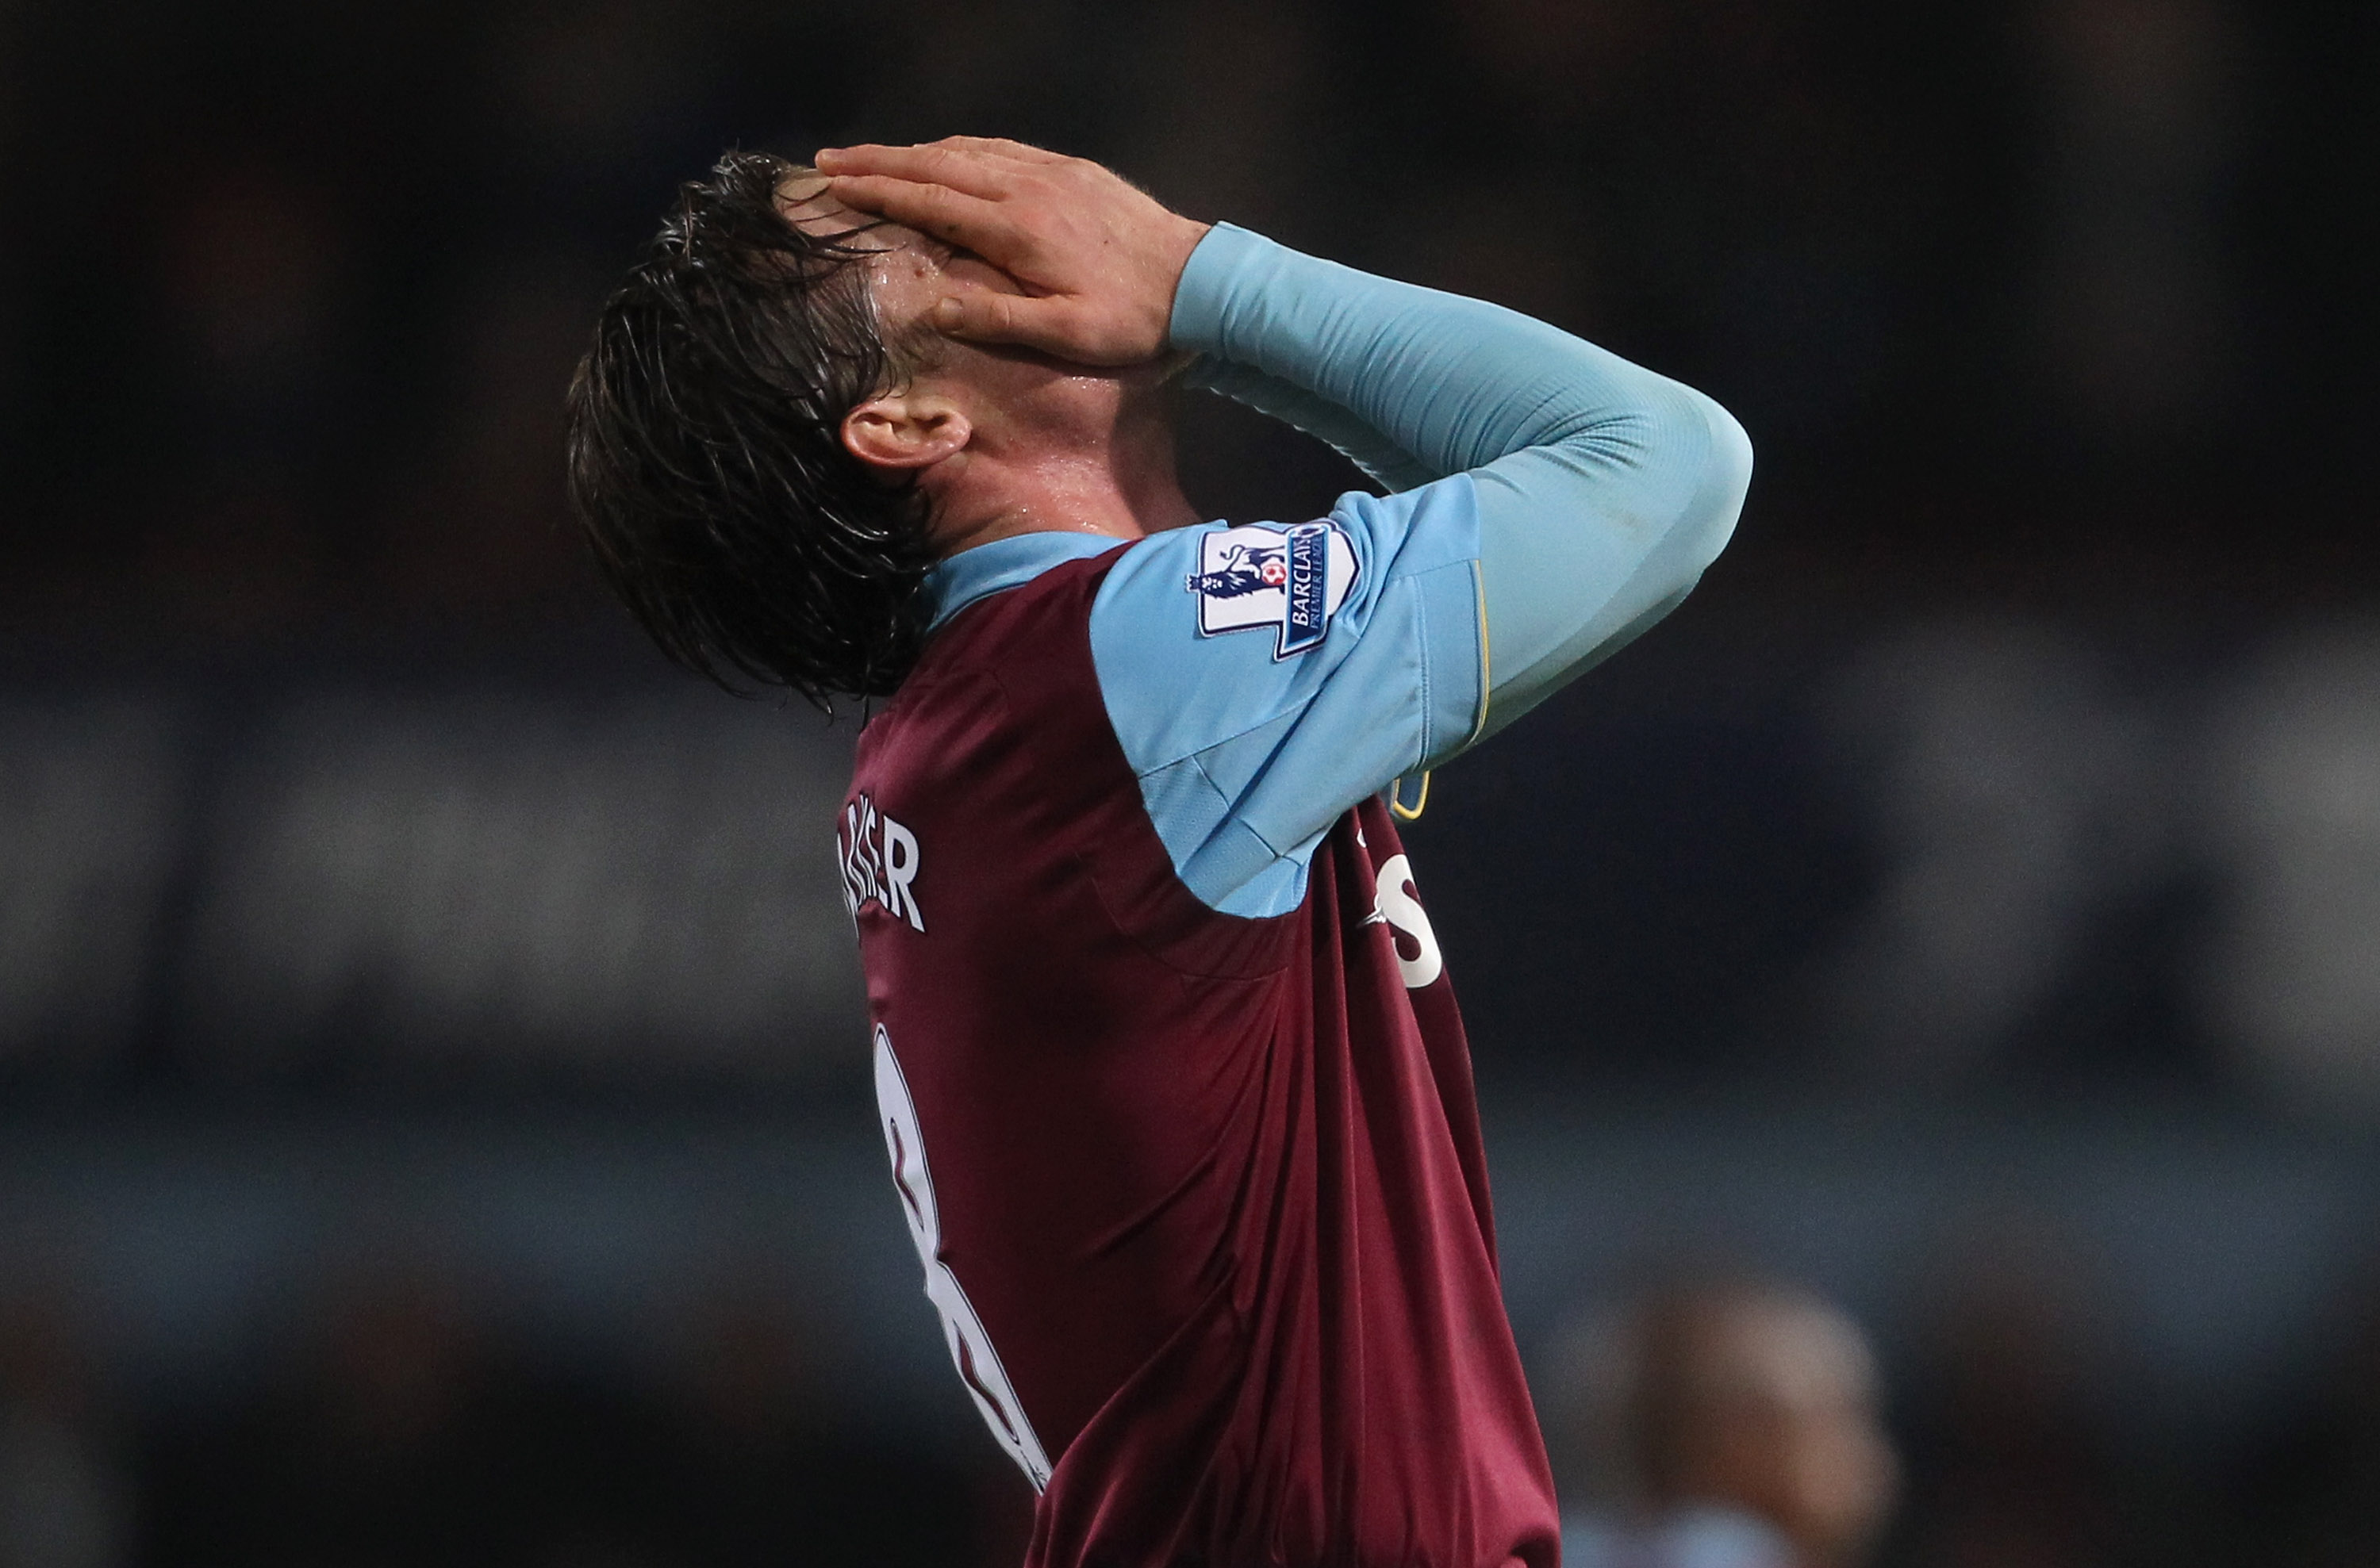 LONDON, ENGLAND - DECEMBER 28:  Scott Parker of West Ham United reacts after the Barclays Premier League match between West Ham United and Everton at the Boleyn Ground on December 28, 2010 in London, England.  (Photo by Scott Heavey/Getty Images)